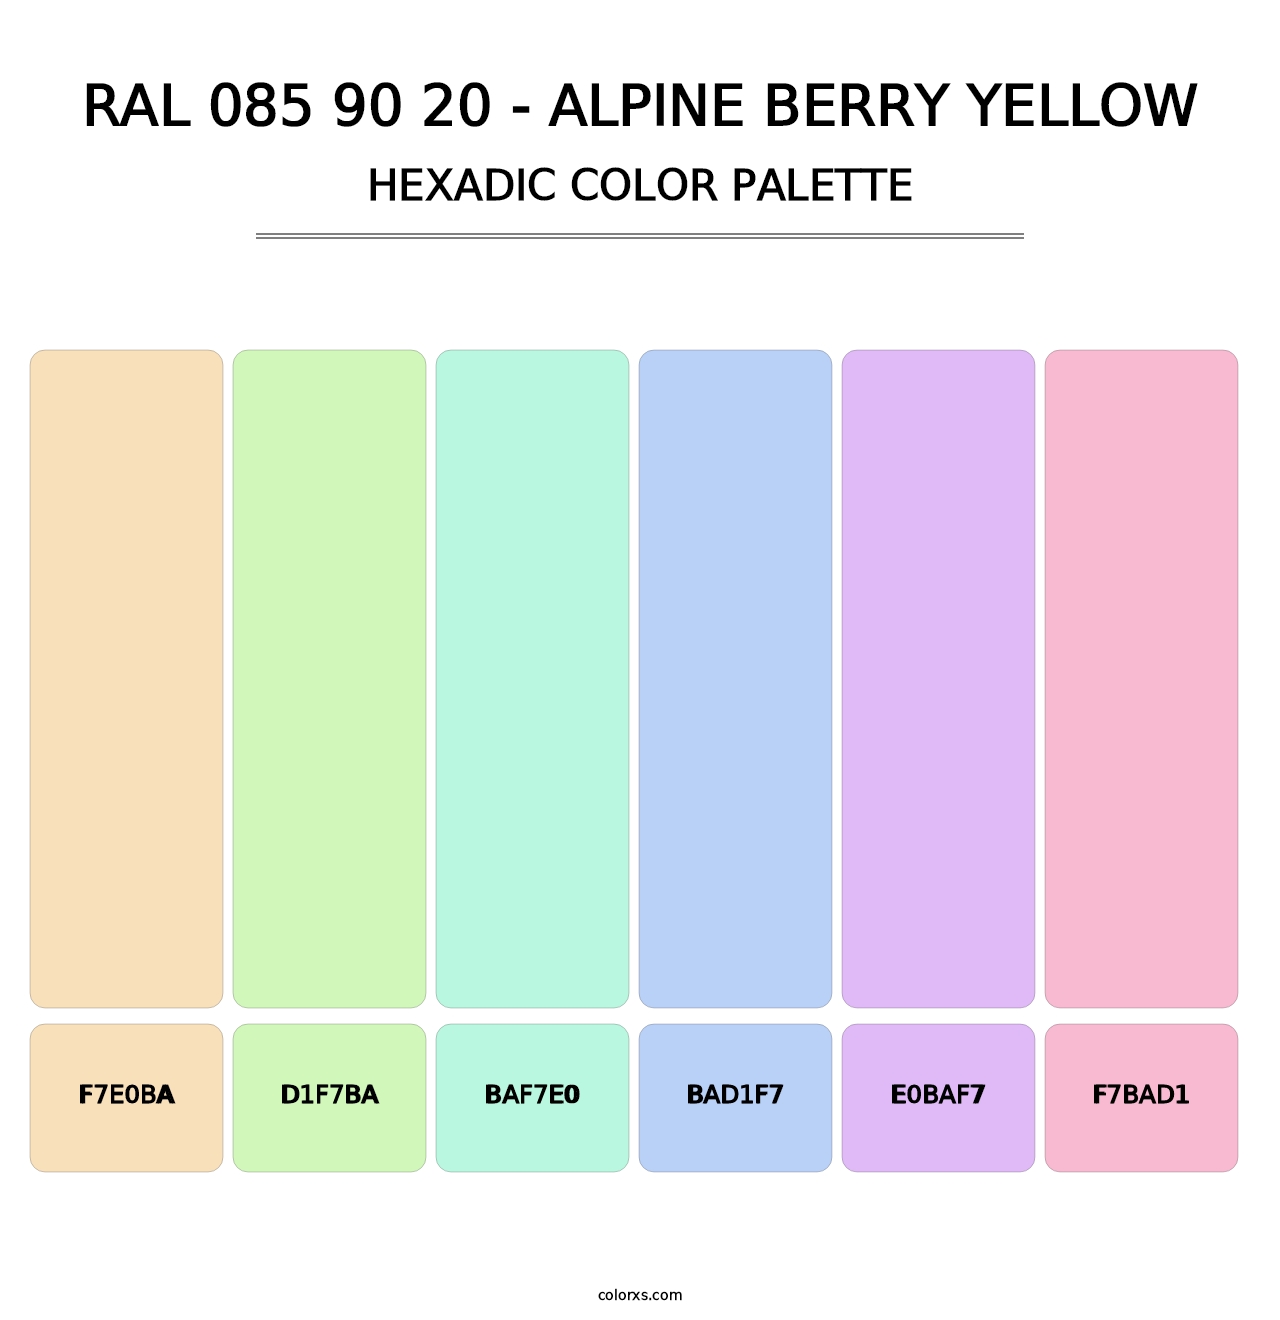 RAL 085 90 20 - Alpine Berry Yellow - Hexadic Color Palette